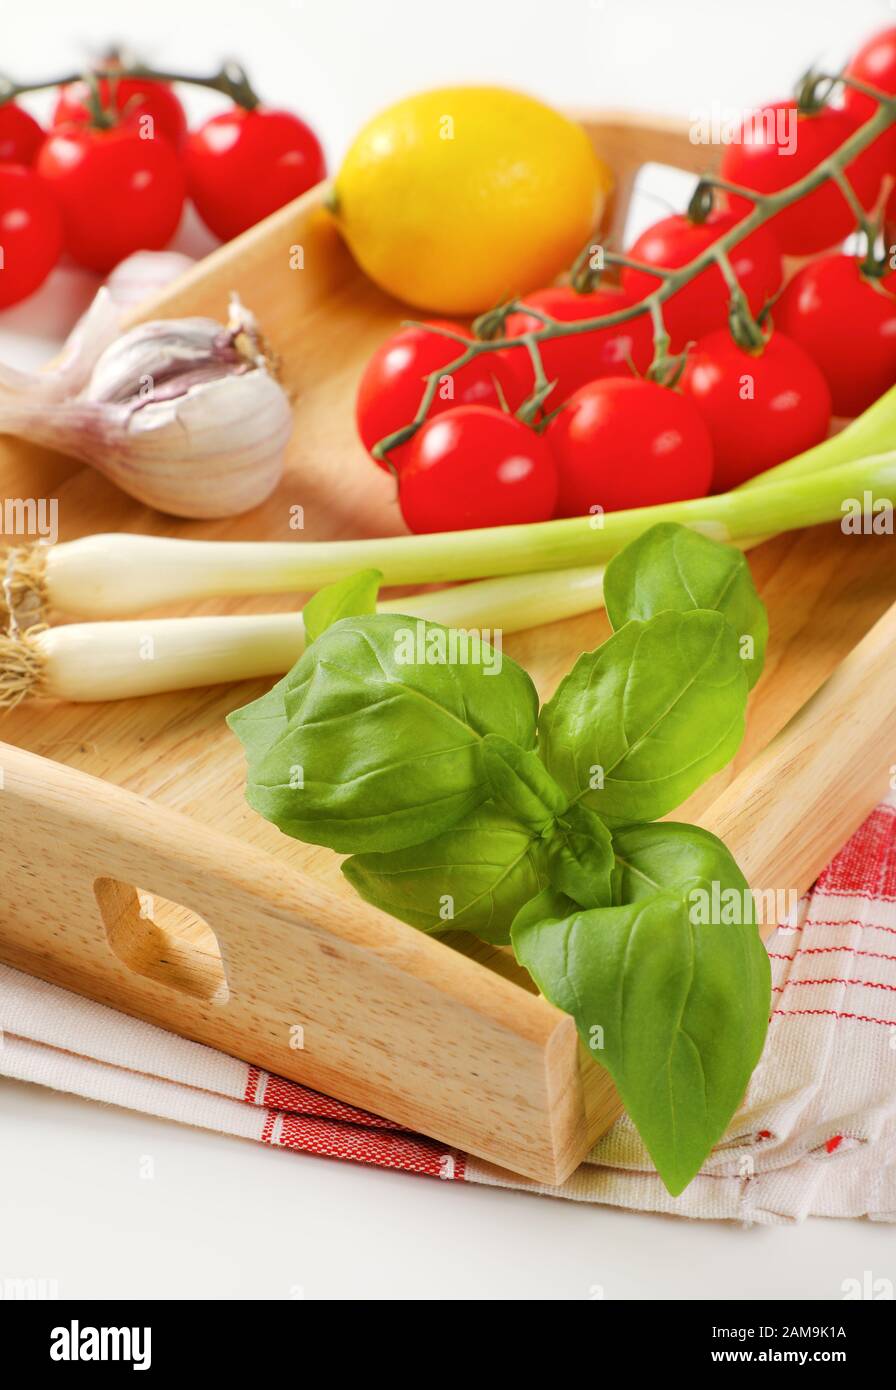 Fresh vegetables and lemon on wooden serving tray Stock Photo